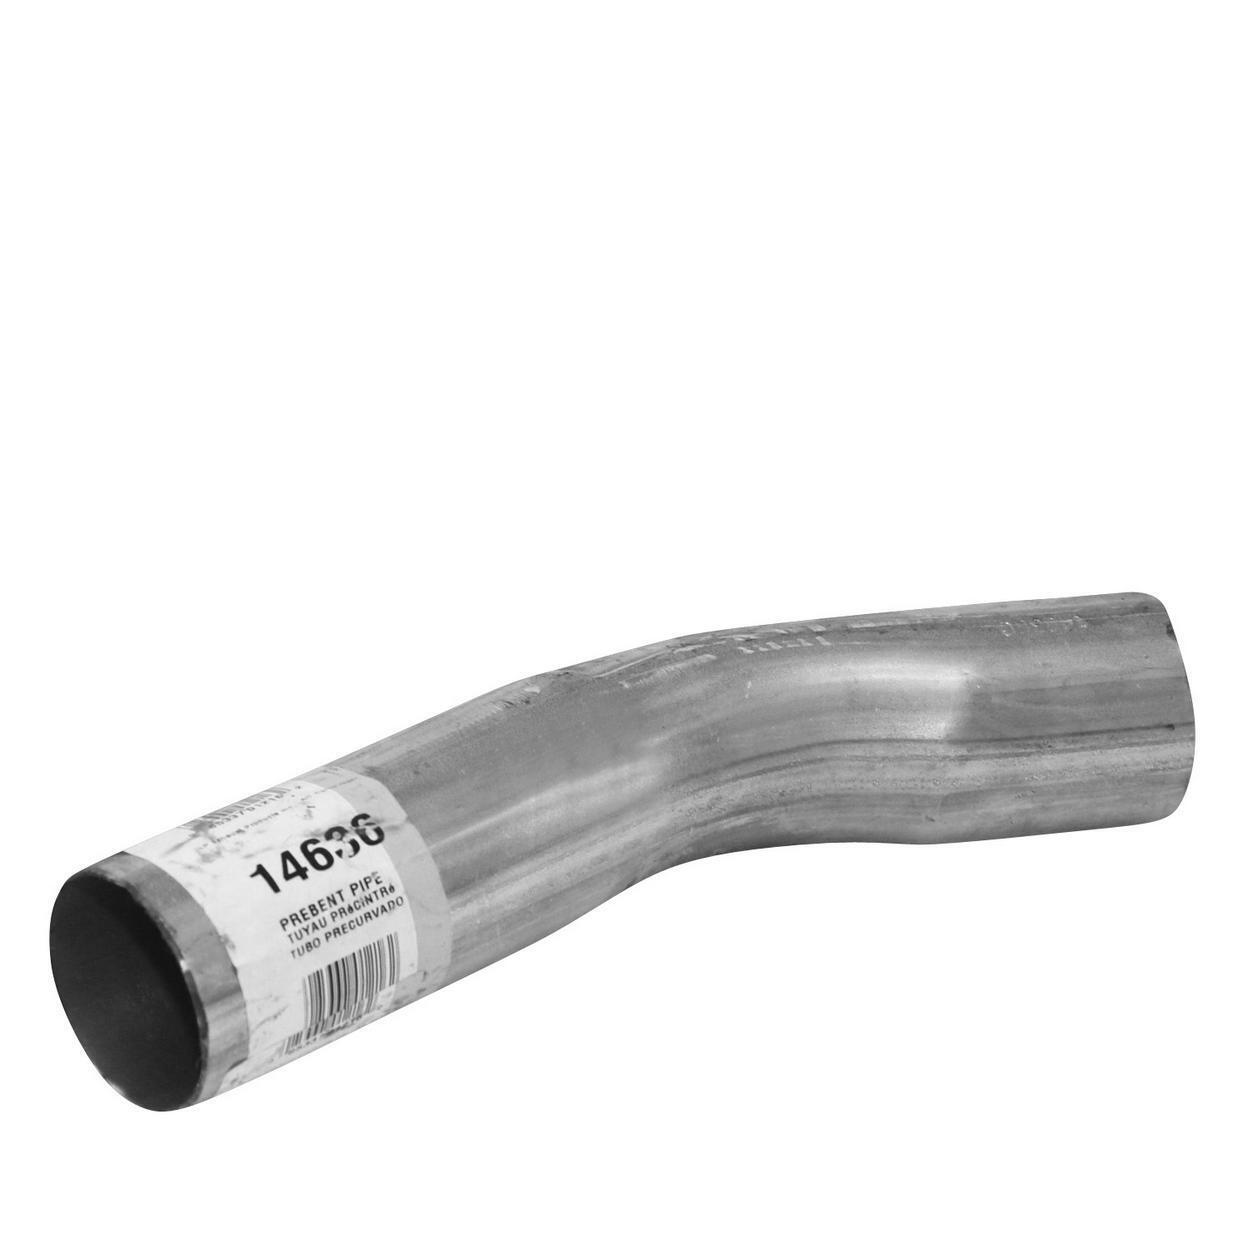 Exhaust Tail Pipe for 1985-1987 Oldsmobile Calais 2.5L L4 GAS OHV